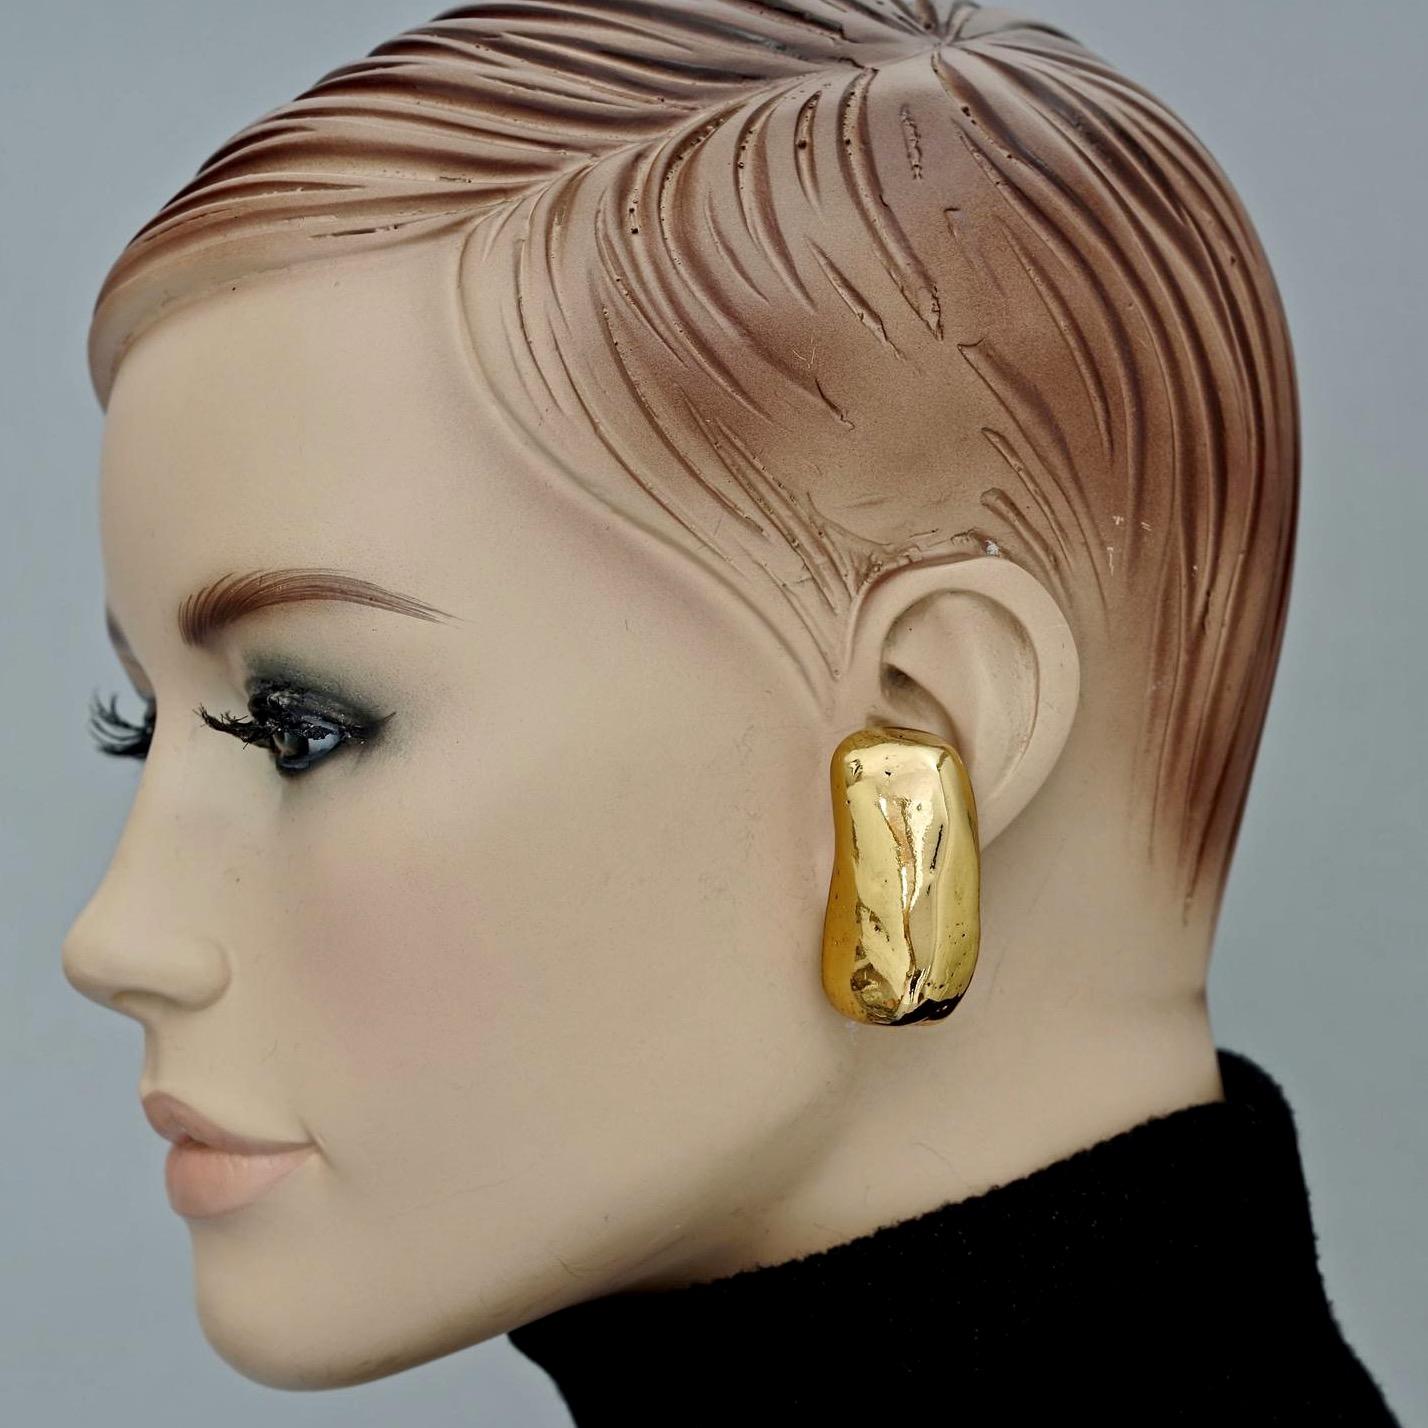 Vintage YVES SAINT LAURENT Ysl Nugget Pillow Chunky Earrings

Measurements:
Height: 1.69 inches (4.3 cms)
Width: 0.90 inch (2.3 cms)
Weight per Earring: 26 grams

Features:
- 100% Authentic YVES SAINT LAURENT.
- Chunky earrings in nuggets/ pillow